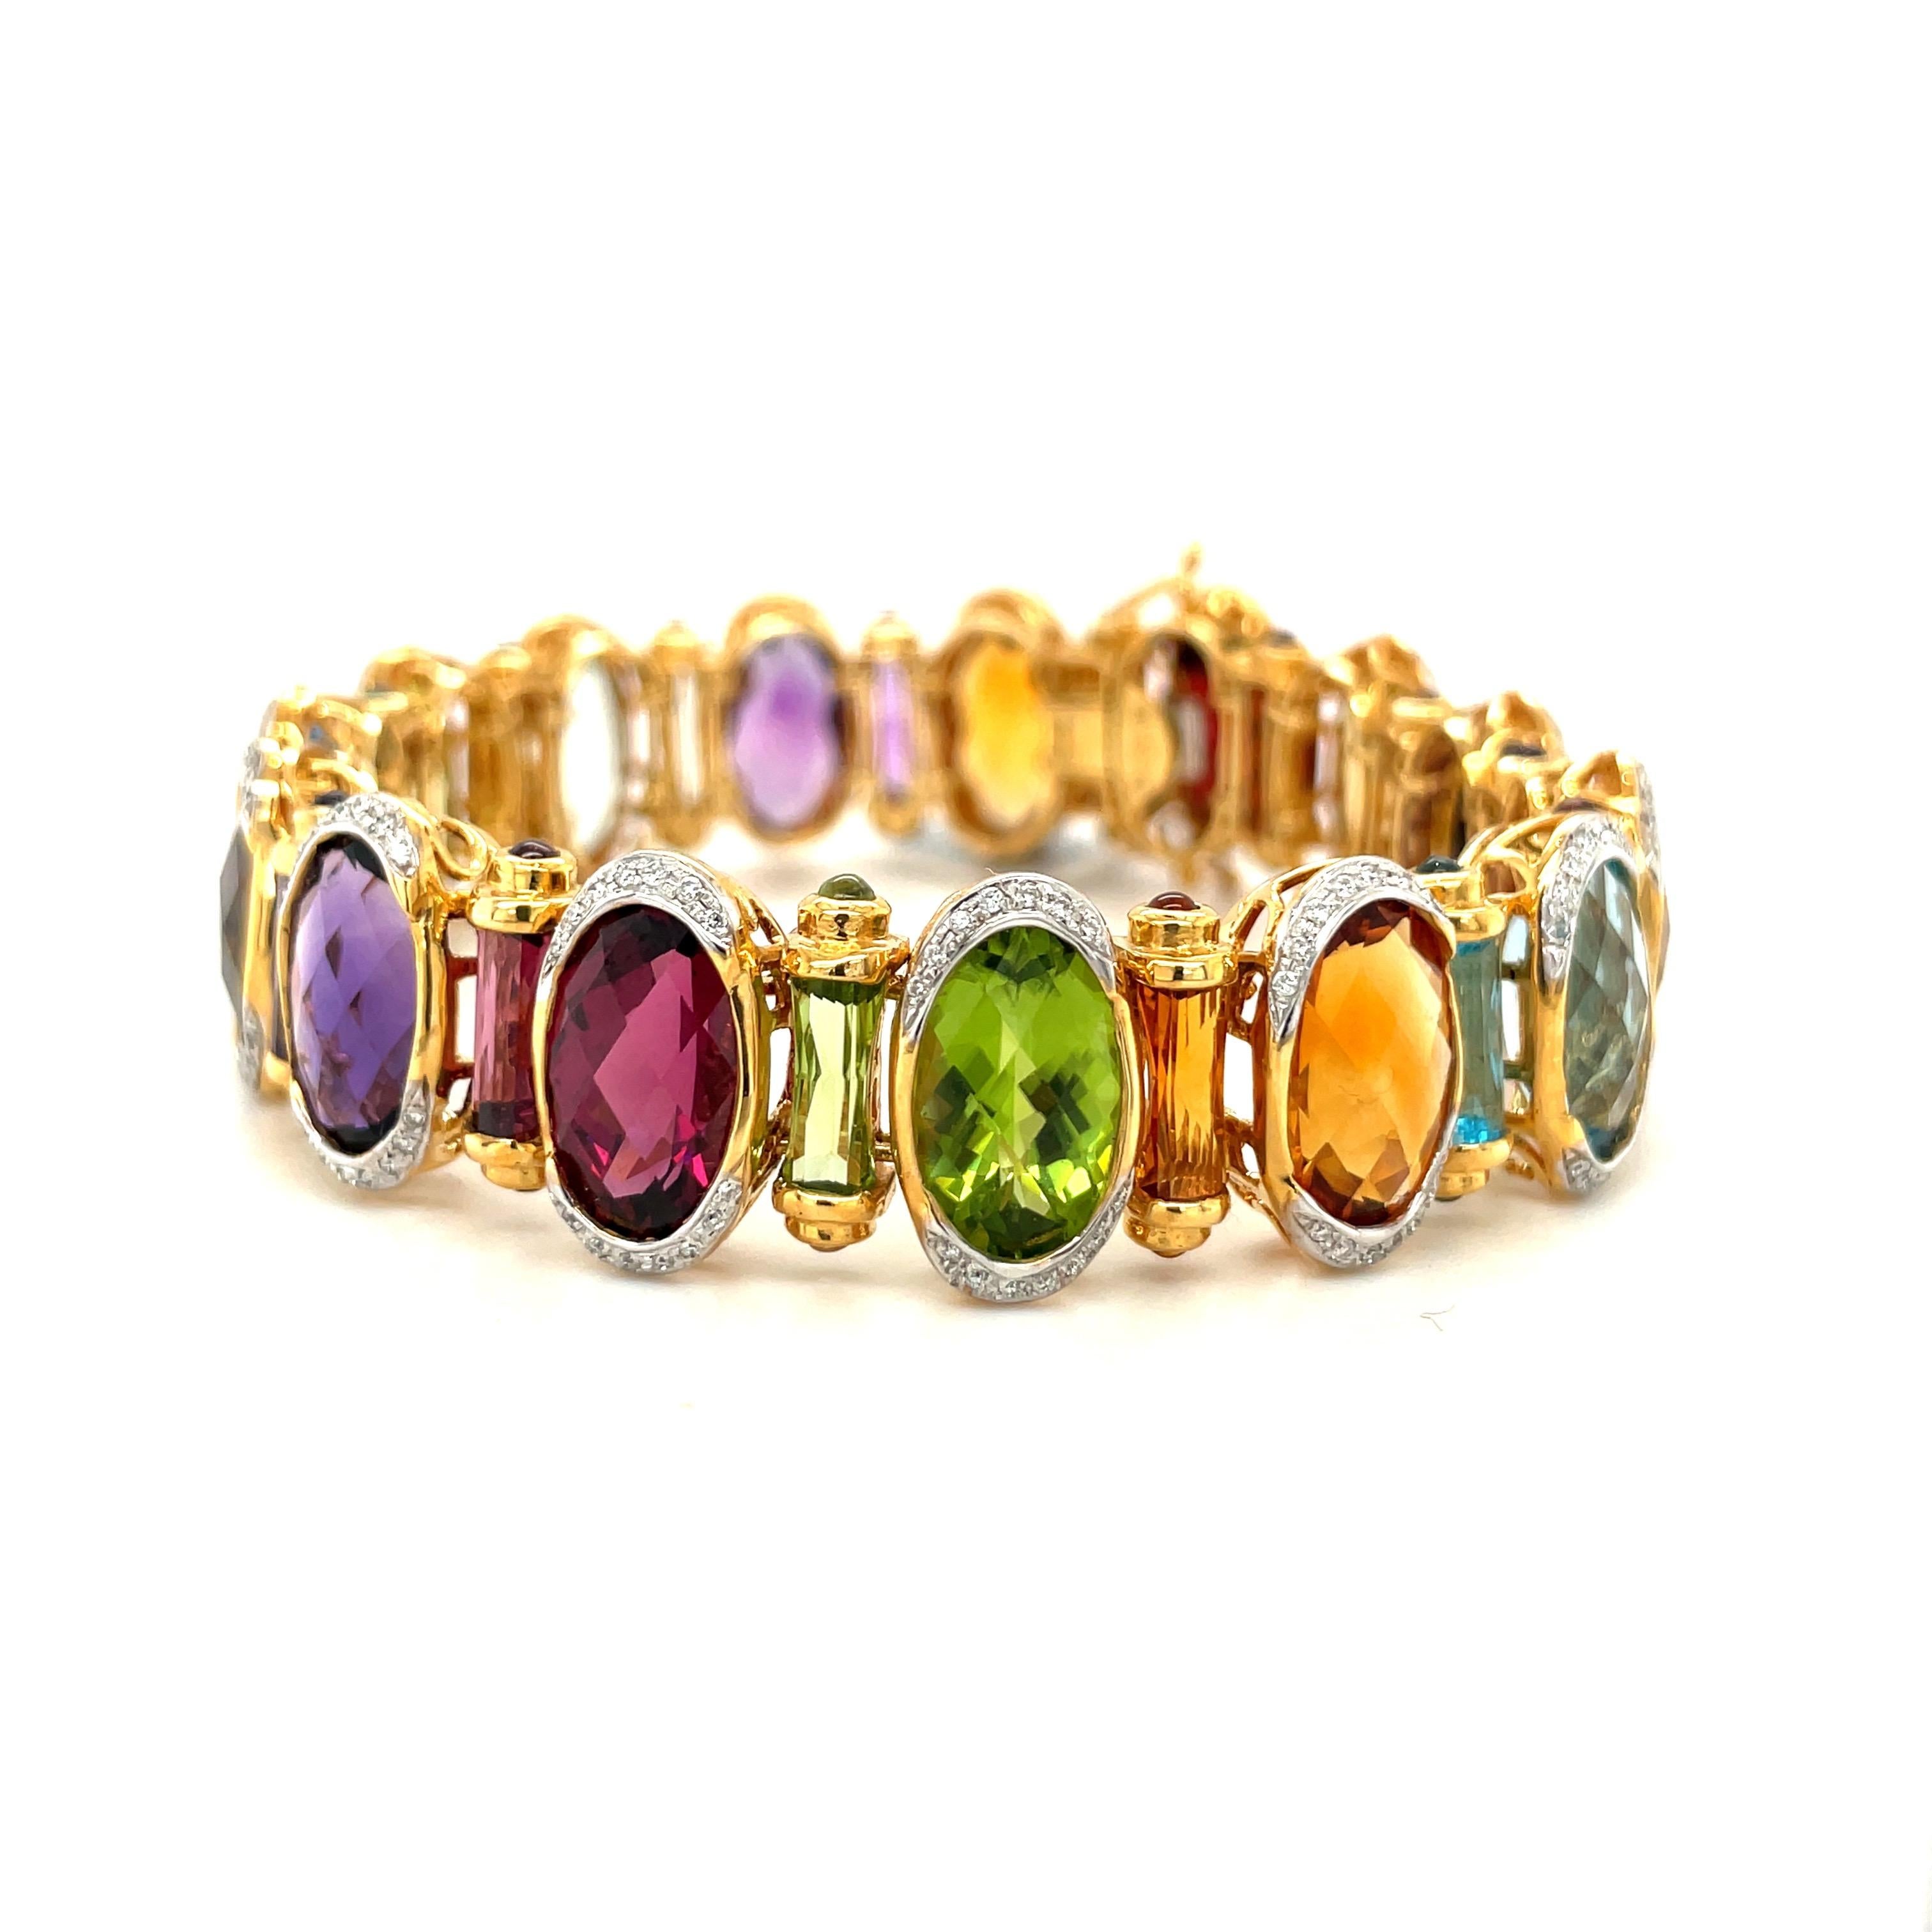 Brighten your day with this amazing Semi Precious colorful bracelet.
The  18 karat yellow gold bracelet is designed with 15 ovals briolette in Blue Topaz, Citrine, Garnet, Amethyst, Lemon Quartz, Peridot ,Pink Tourmaline and Iolite. Each stone is